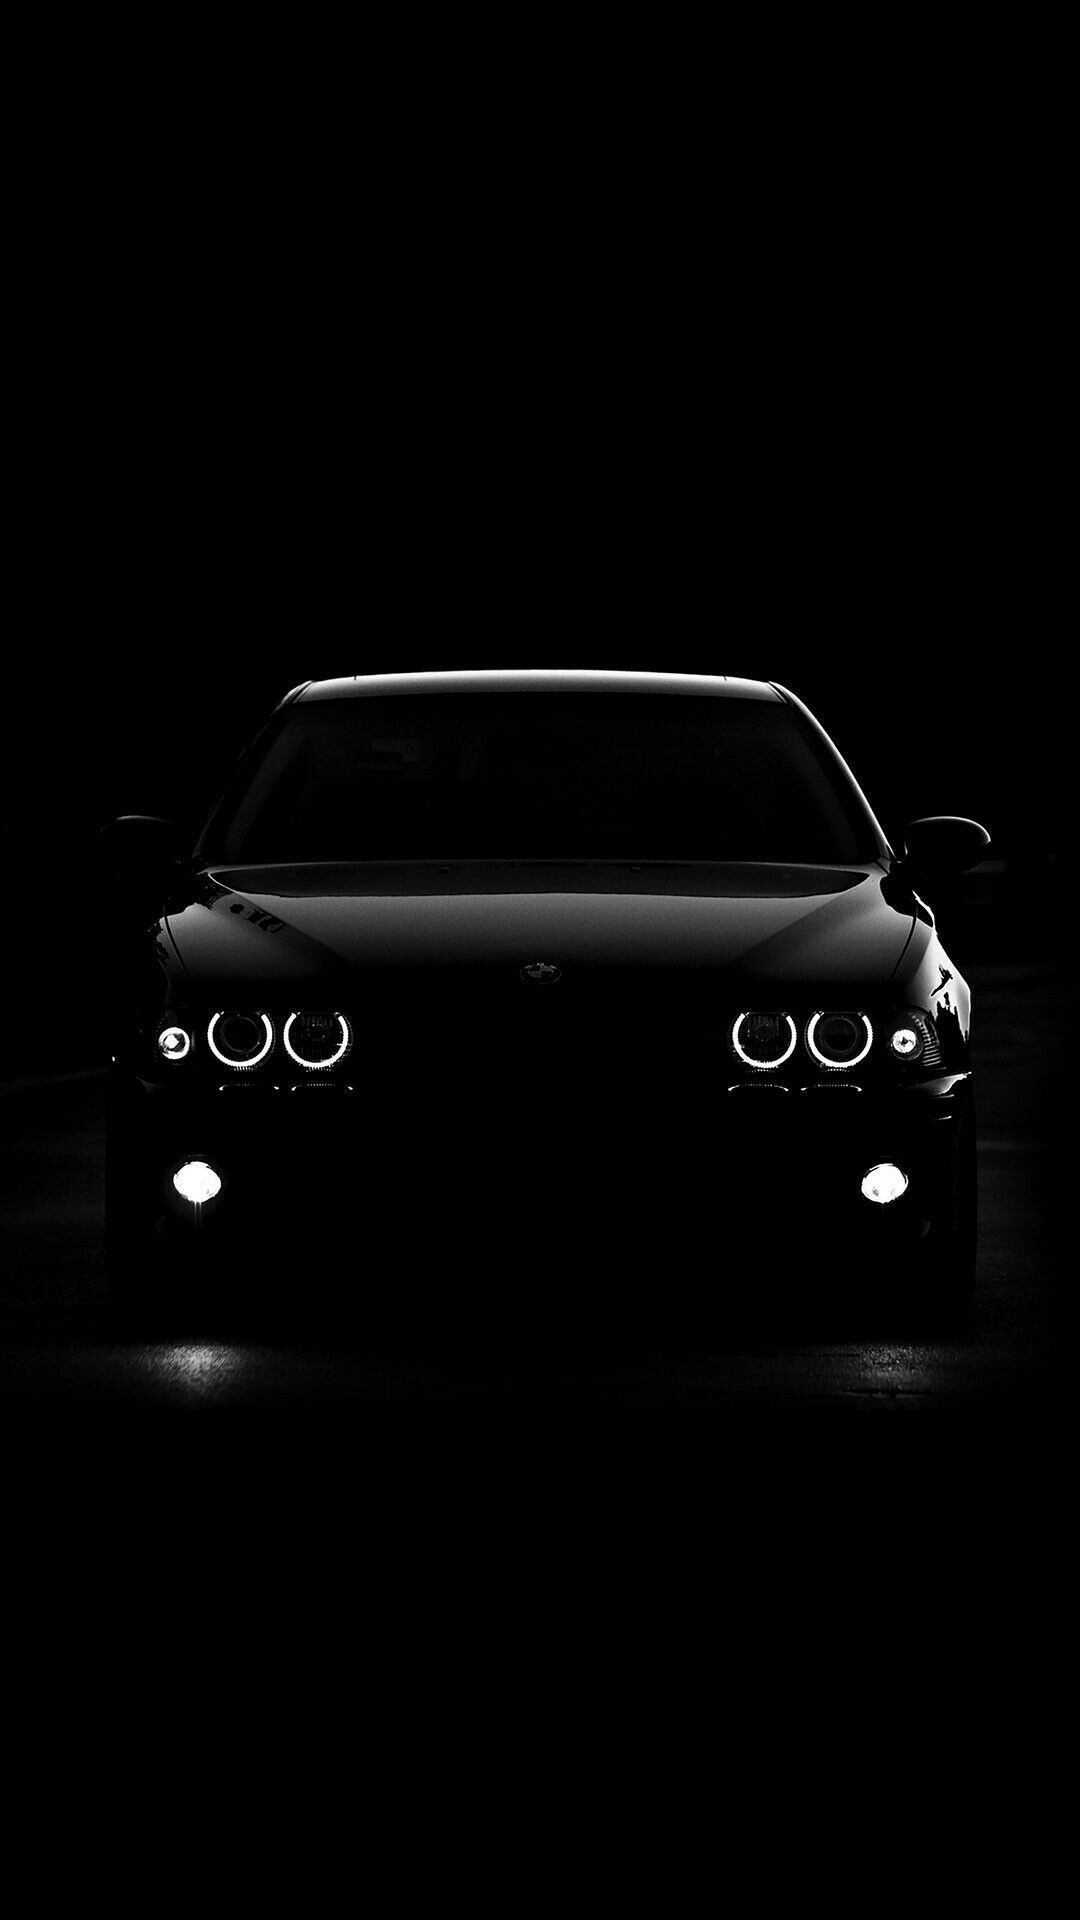 BMW 5 Series, BMW E39, Blacked out, Cars, 1080x1920 Full HD Handy